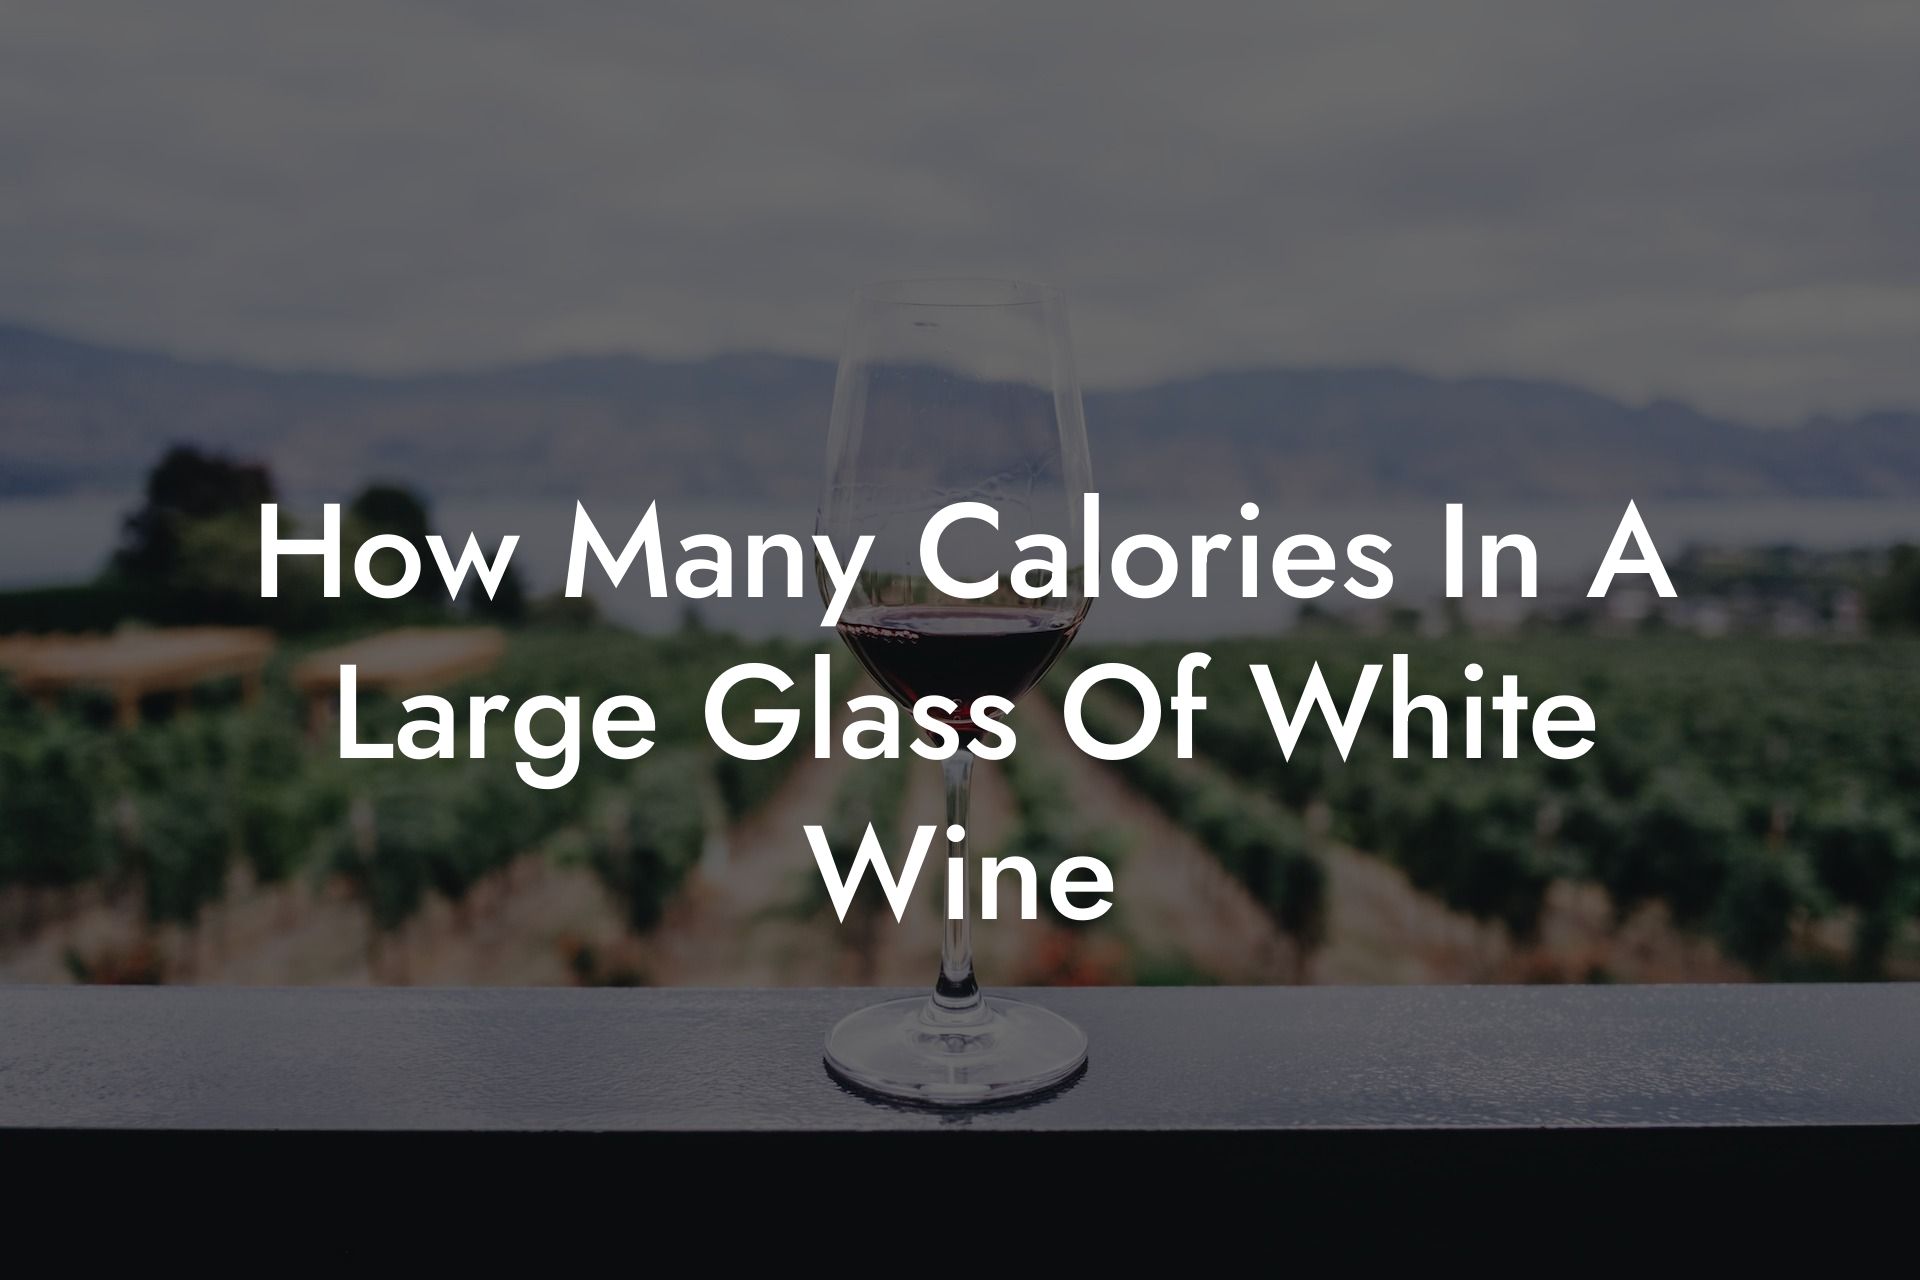 How Many Calories In A Large Glass Of White Wine